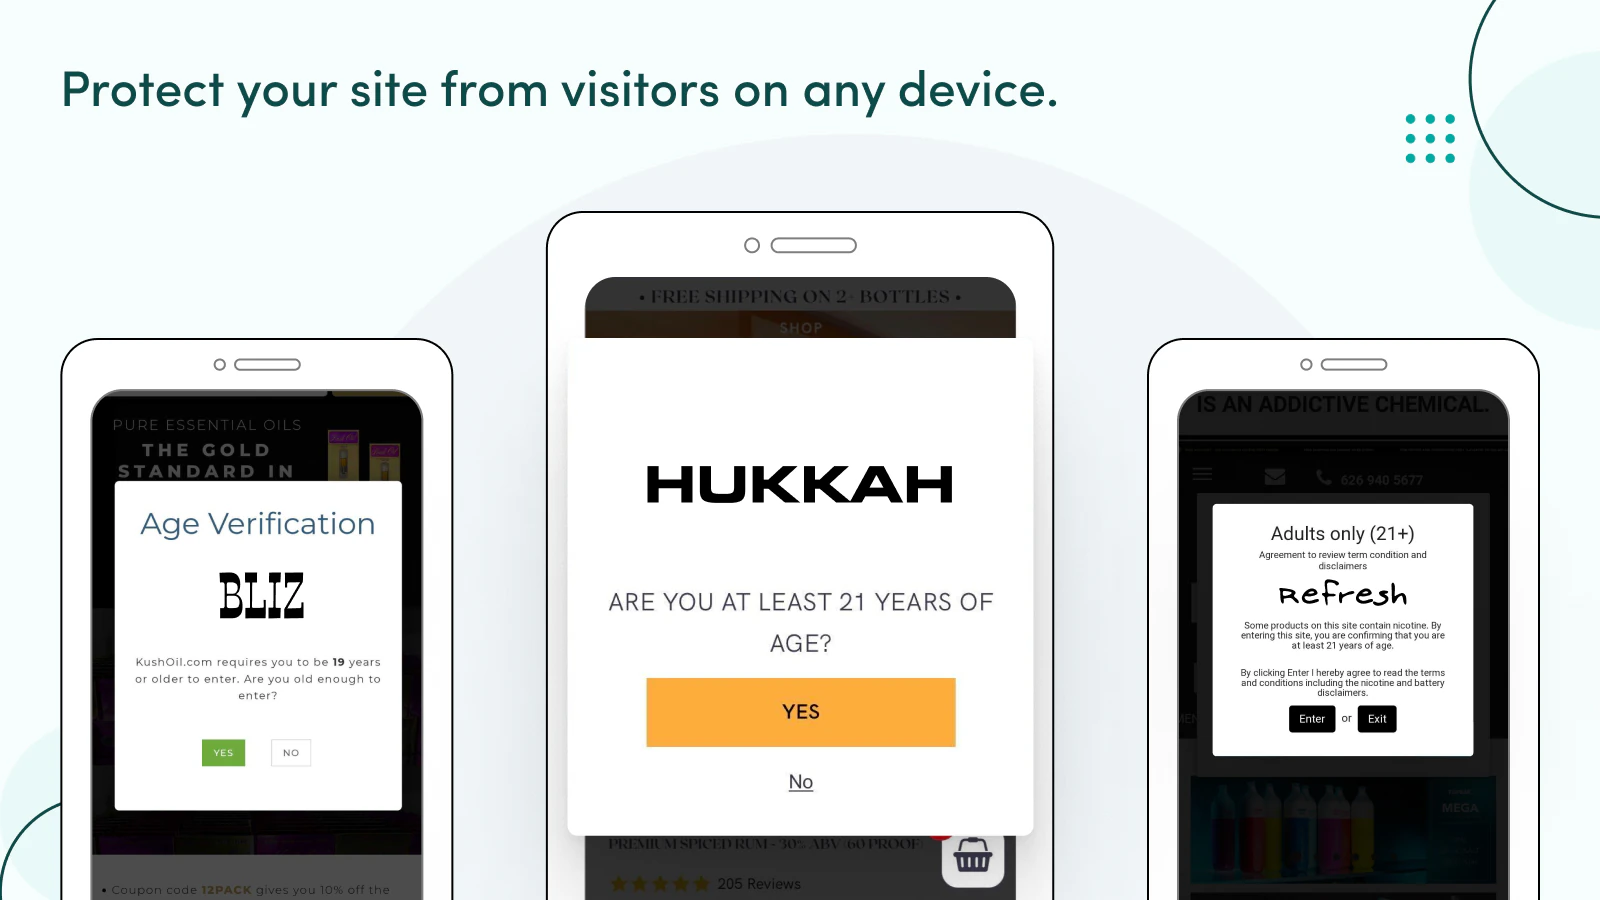 A pop-up that asks website visitors if they are 21 years or older, with yes/no buttons below